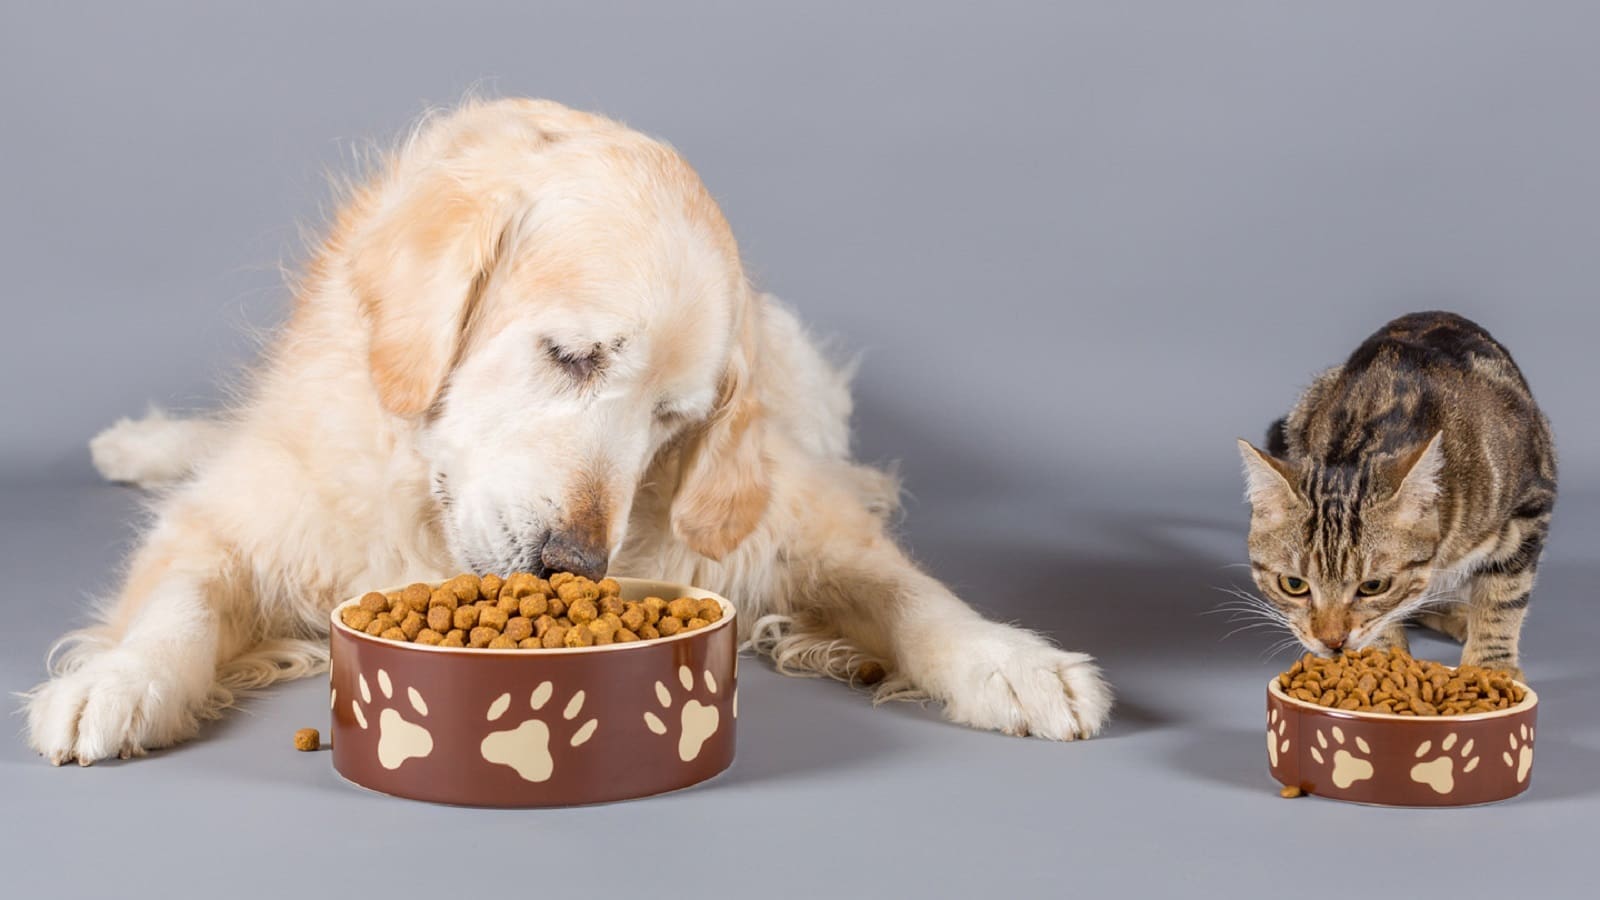 Corbion launches new ingredient to help manufacturers effectively include DHA in pet food